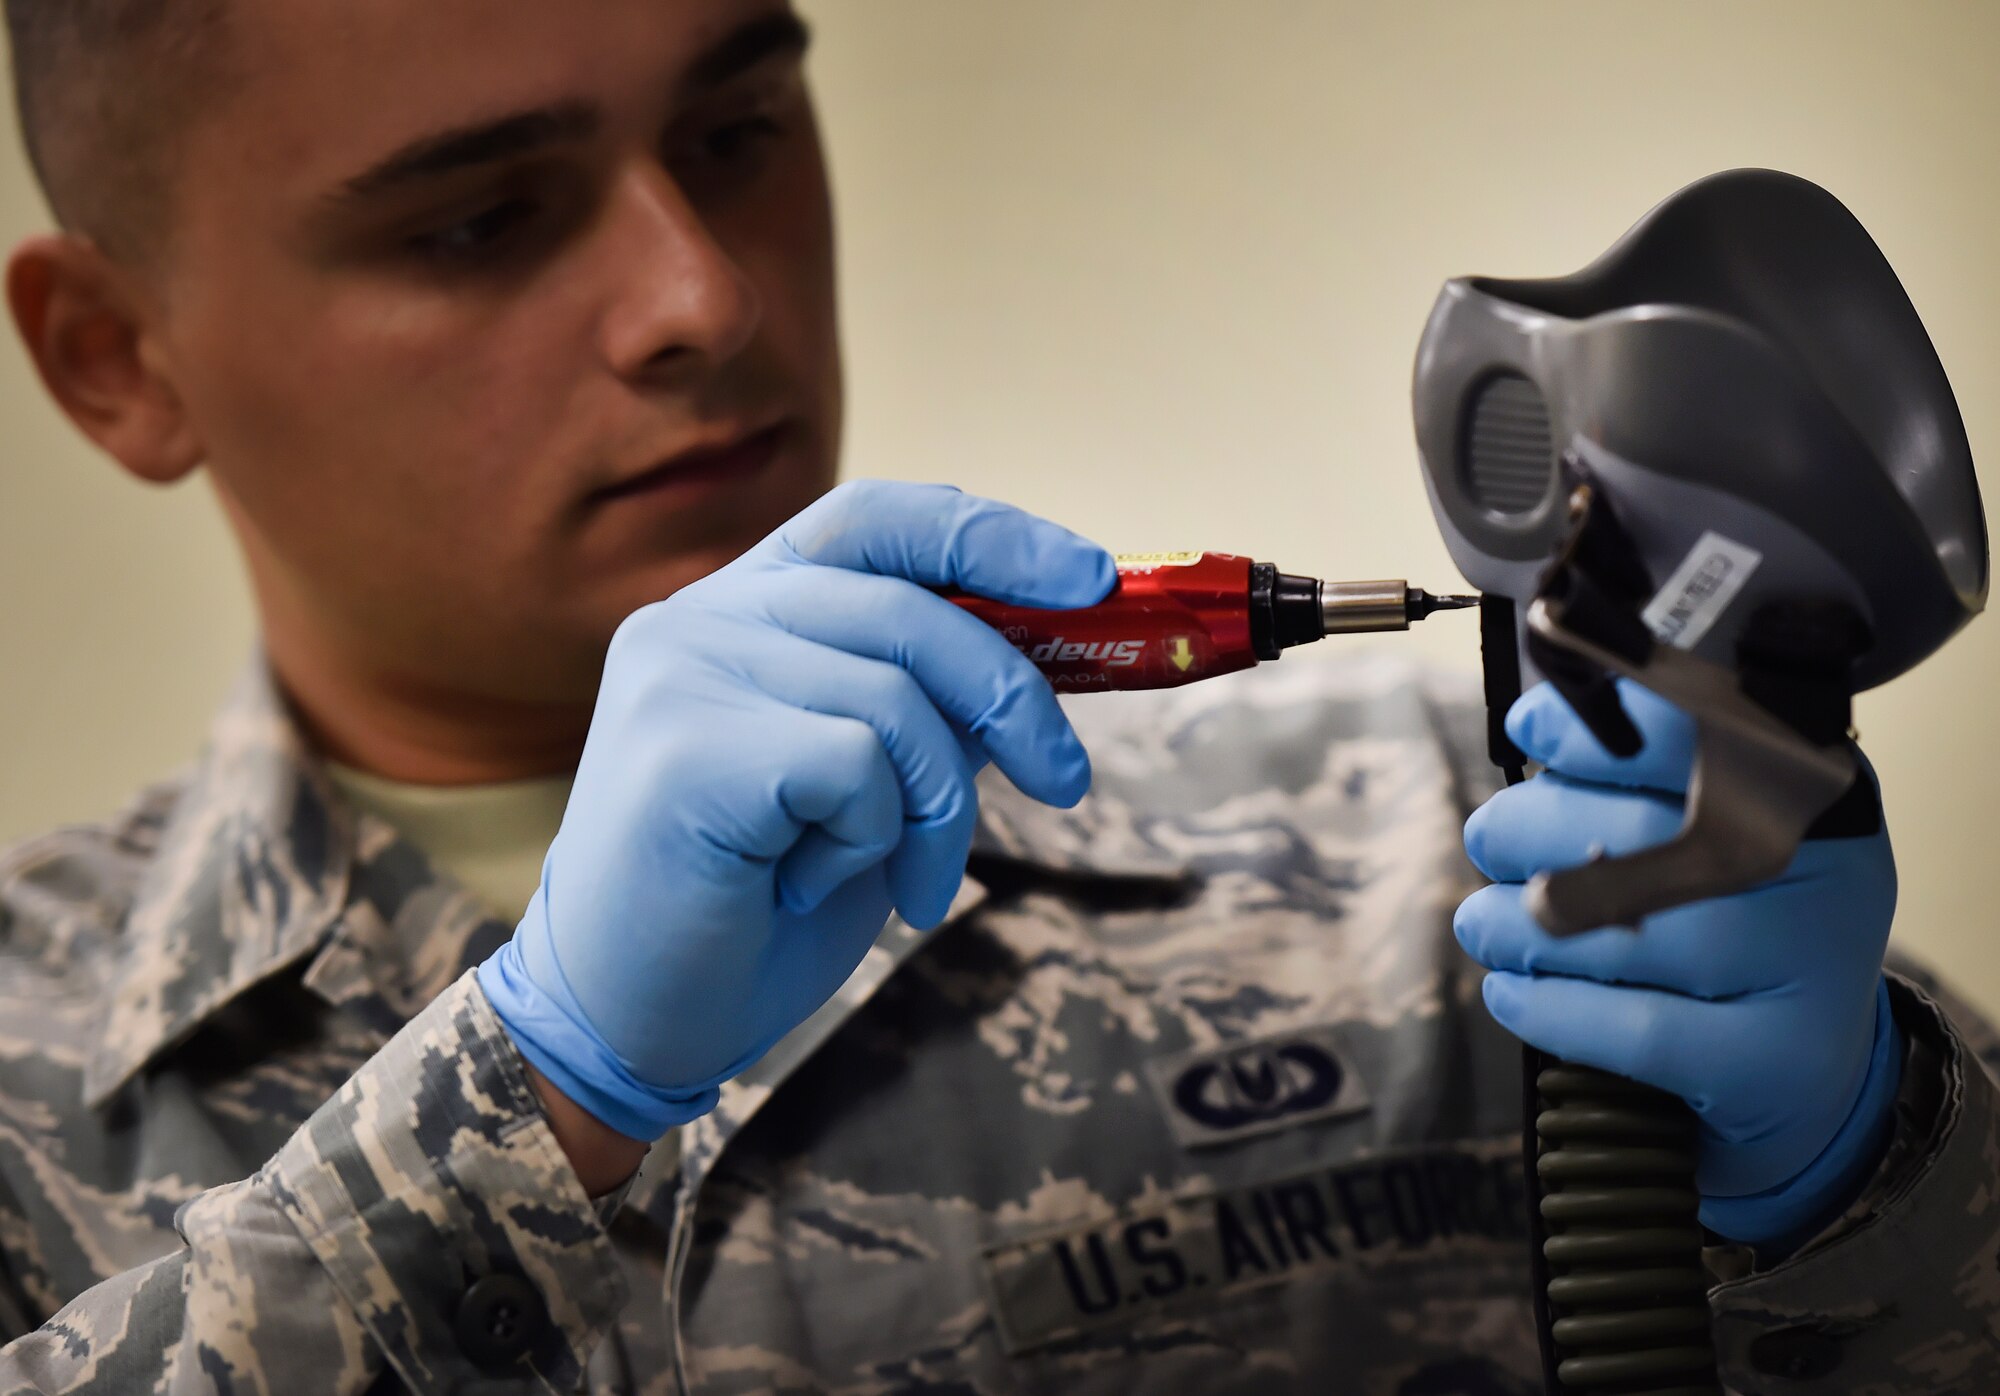 Airman 1st Class Ion Radu, 437th Operation Support Squadron aircrew flight equipment, inspects a helmet and oxygen mask at Joint Base Charleston, S.C., June 20. Airmen assigned to the 437th OSS AFE flight ensure that aircrew equipment including helmets, oxygen masks, life rafts, and parachutes are safe and ready for aircrew members to operate. (Photo by Staff Sgt. Christopher Hubenthal)